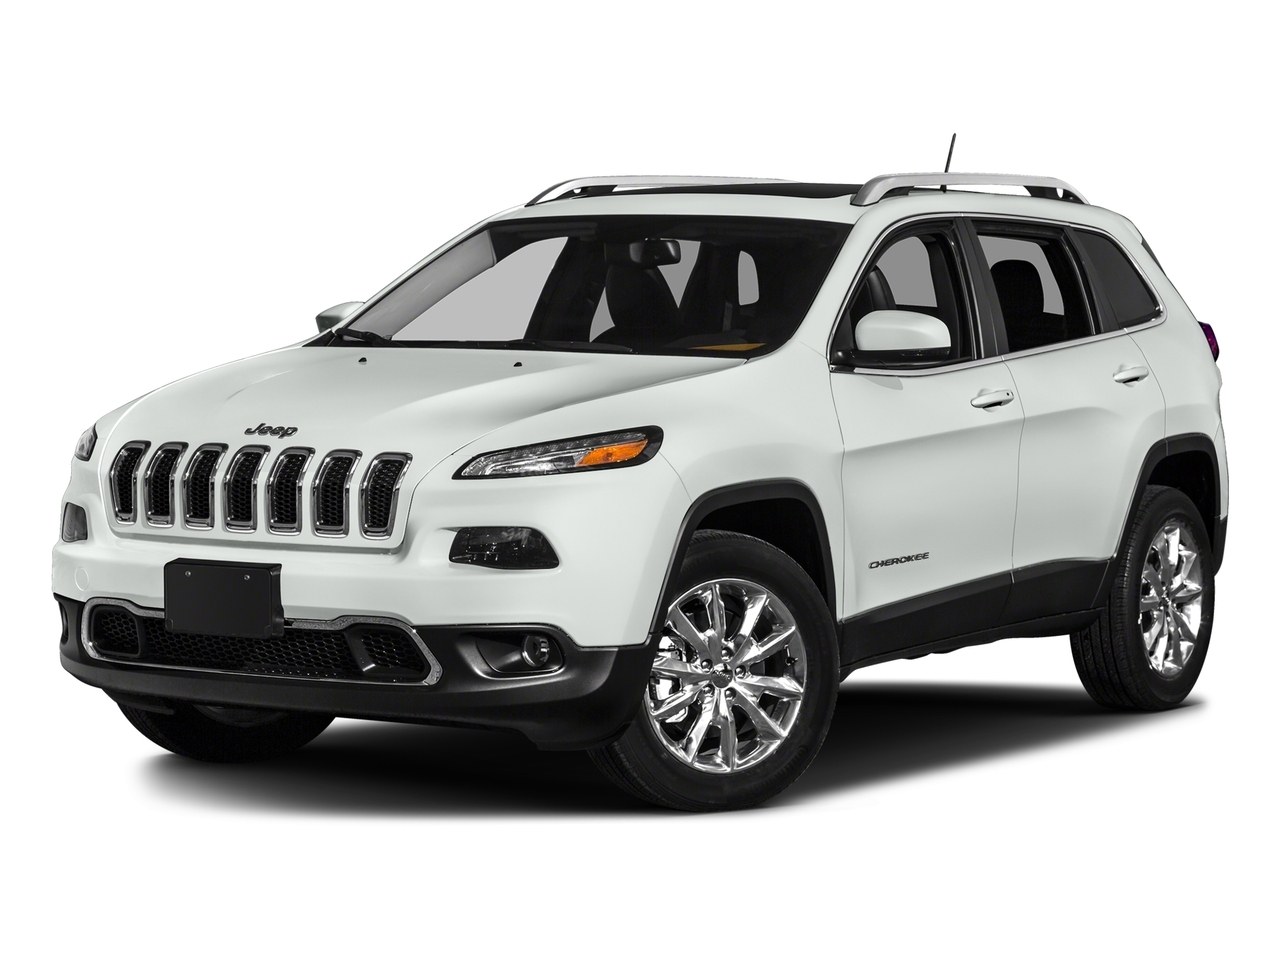 2016 Jeep Cherokee 4x4 Limited, Heat n Cool Front Seats, Pwr Liftgate